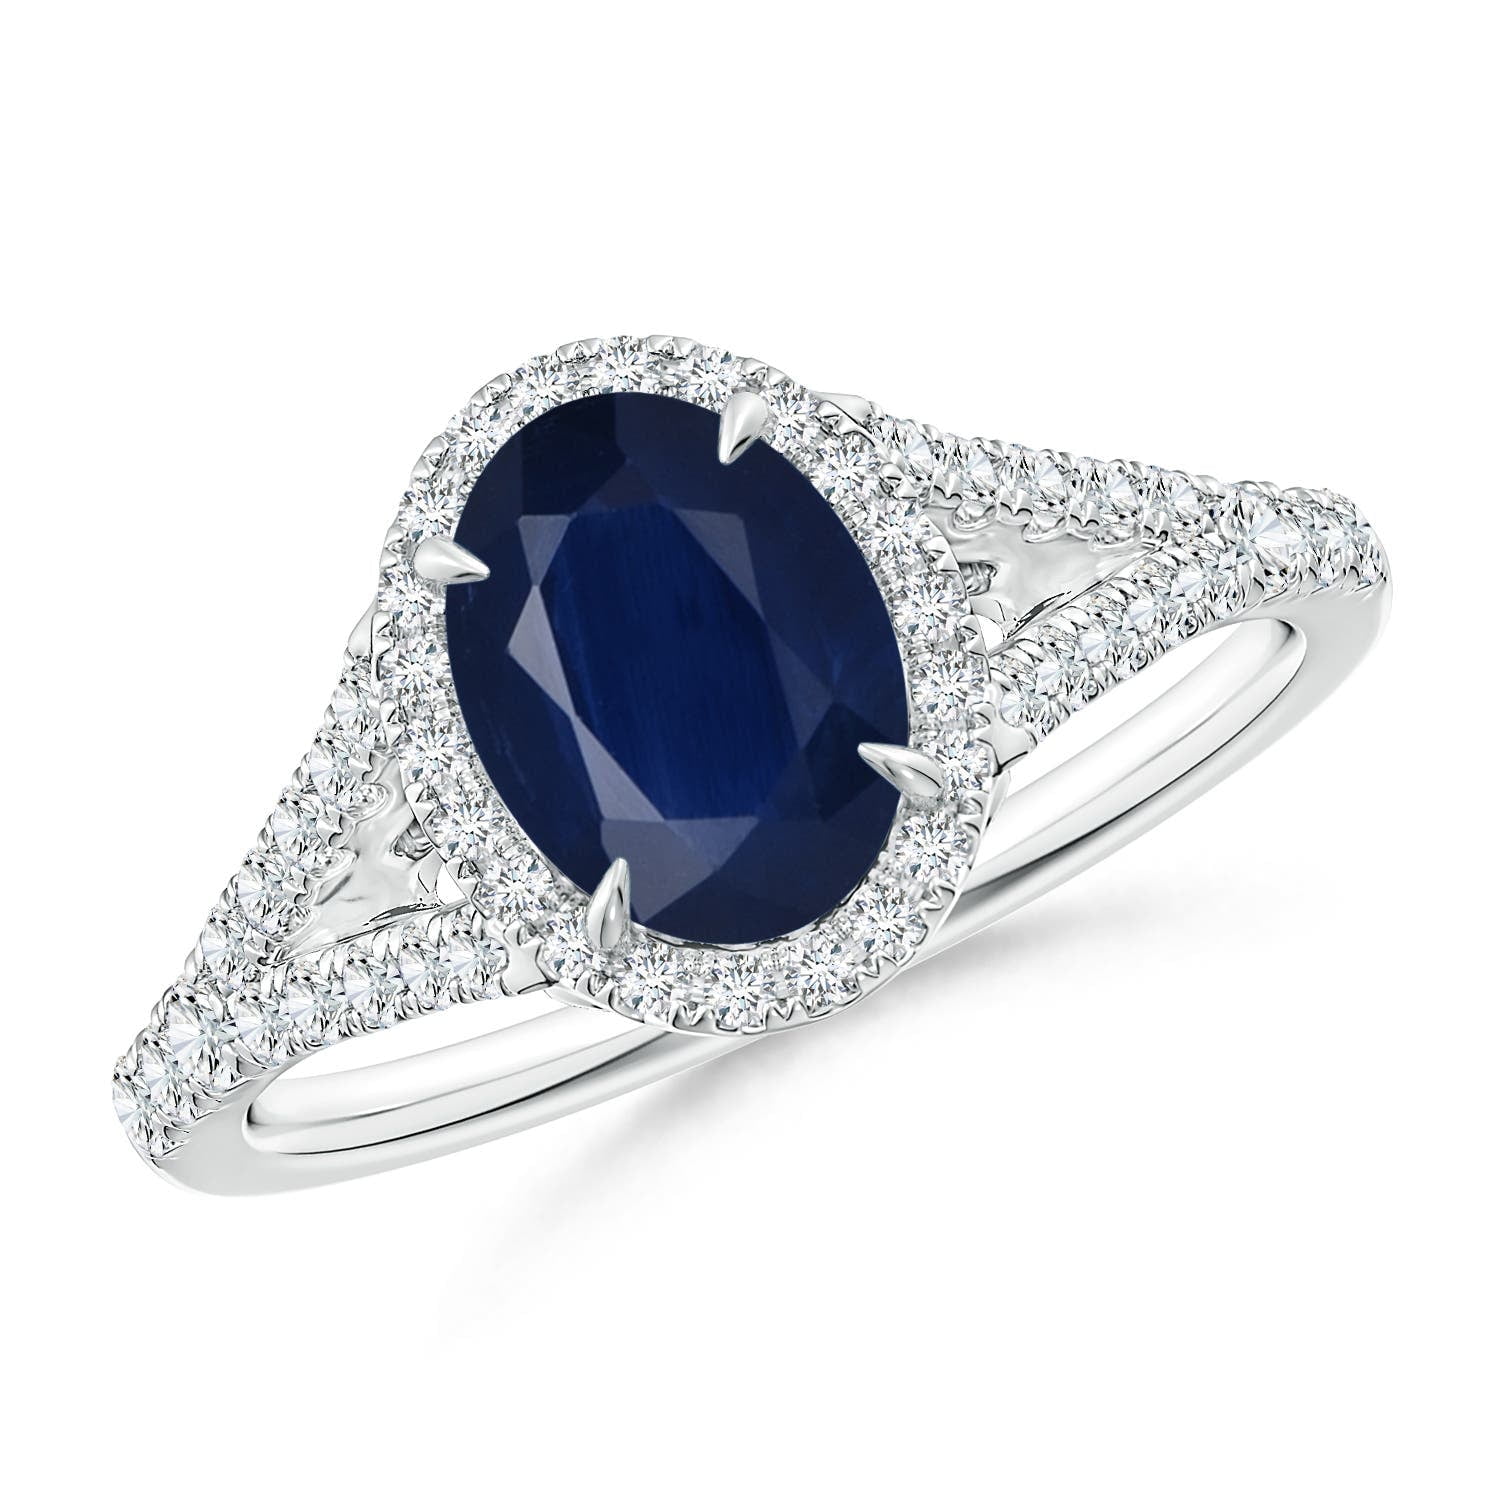 ANGARA Natural 1.55 Ct. Blue Sapphire with Diamond Halo Ring in 14K ...